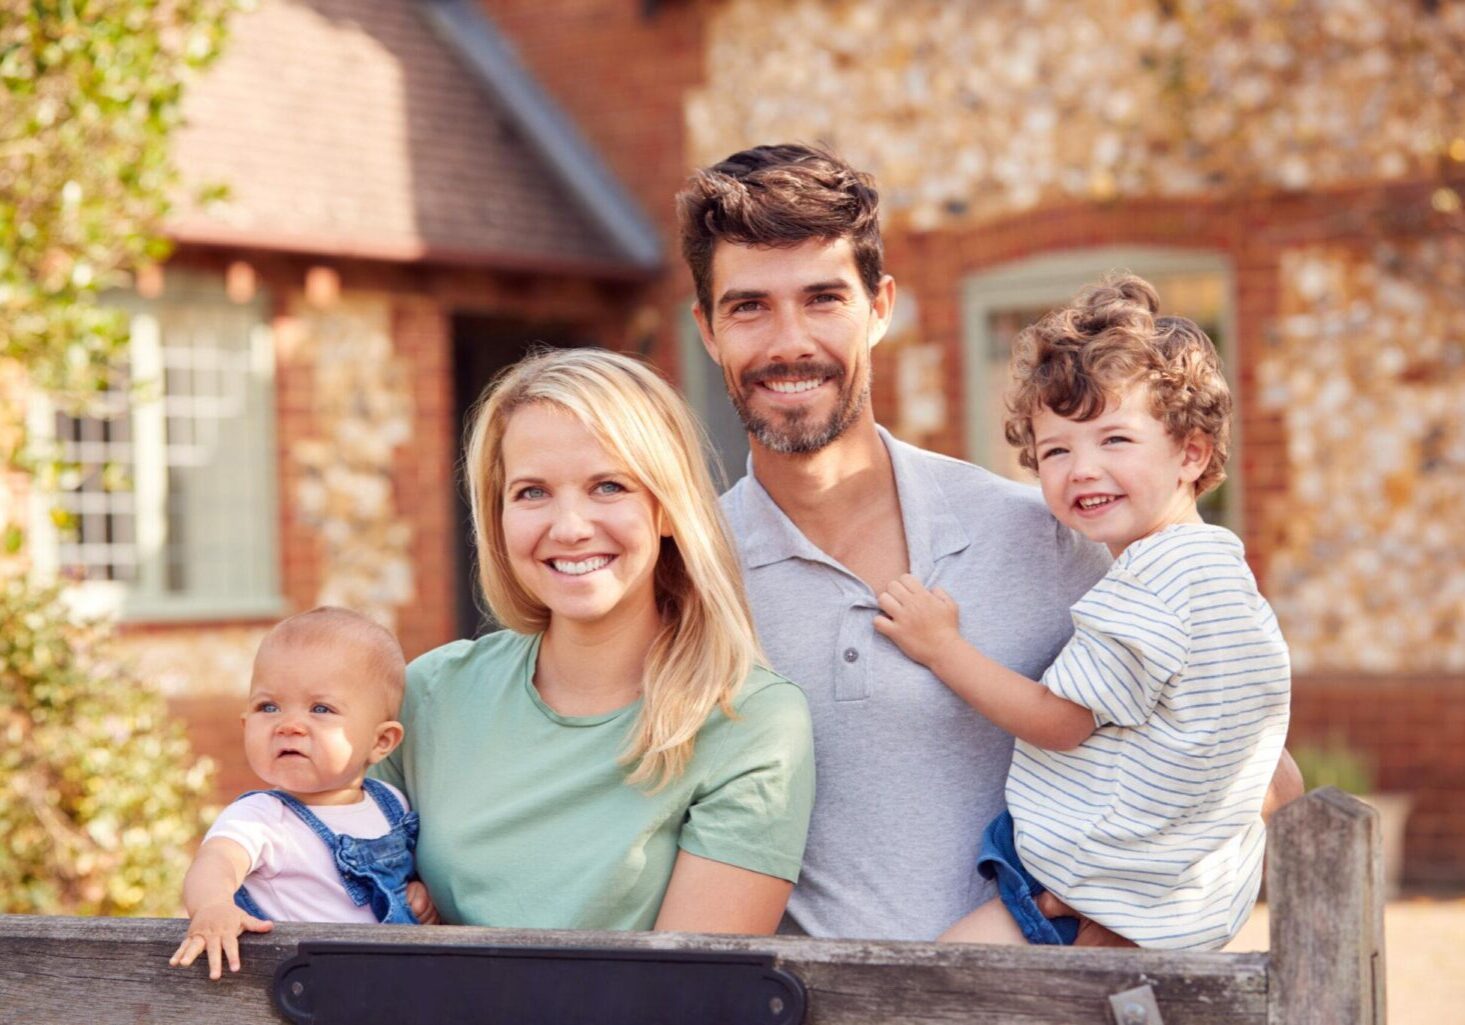 Financial Solutions Tailored for You - Photo Of Smiling Family Standing By Gate Outside Home In Countryside Together